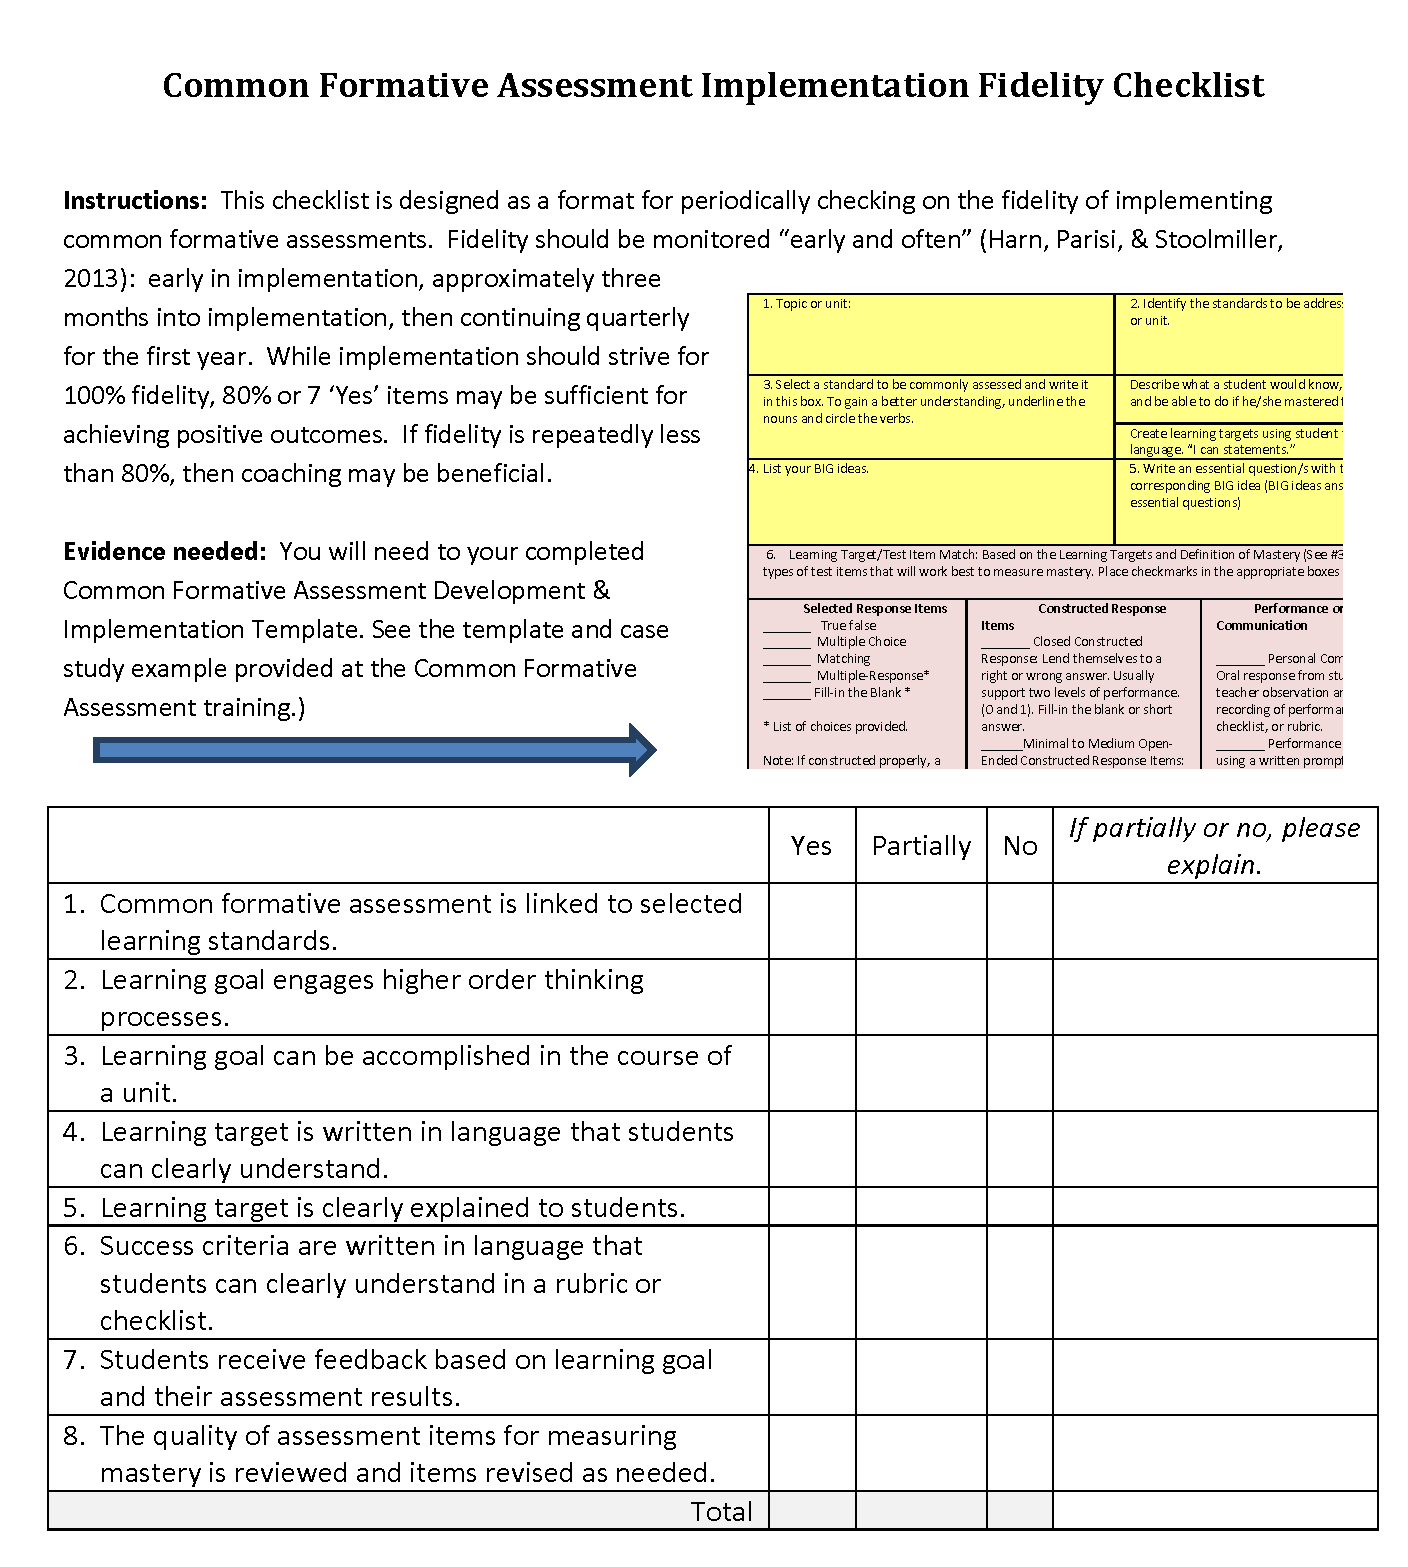 Common Formative Assessment Implementation Fidelity Checklist